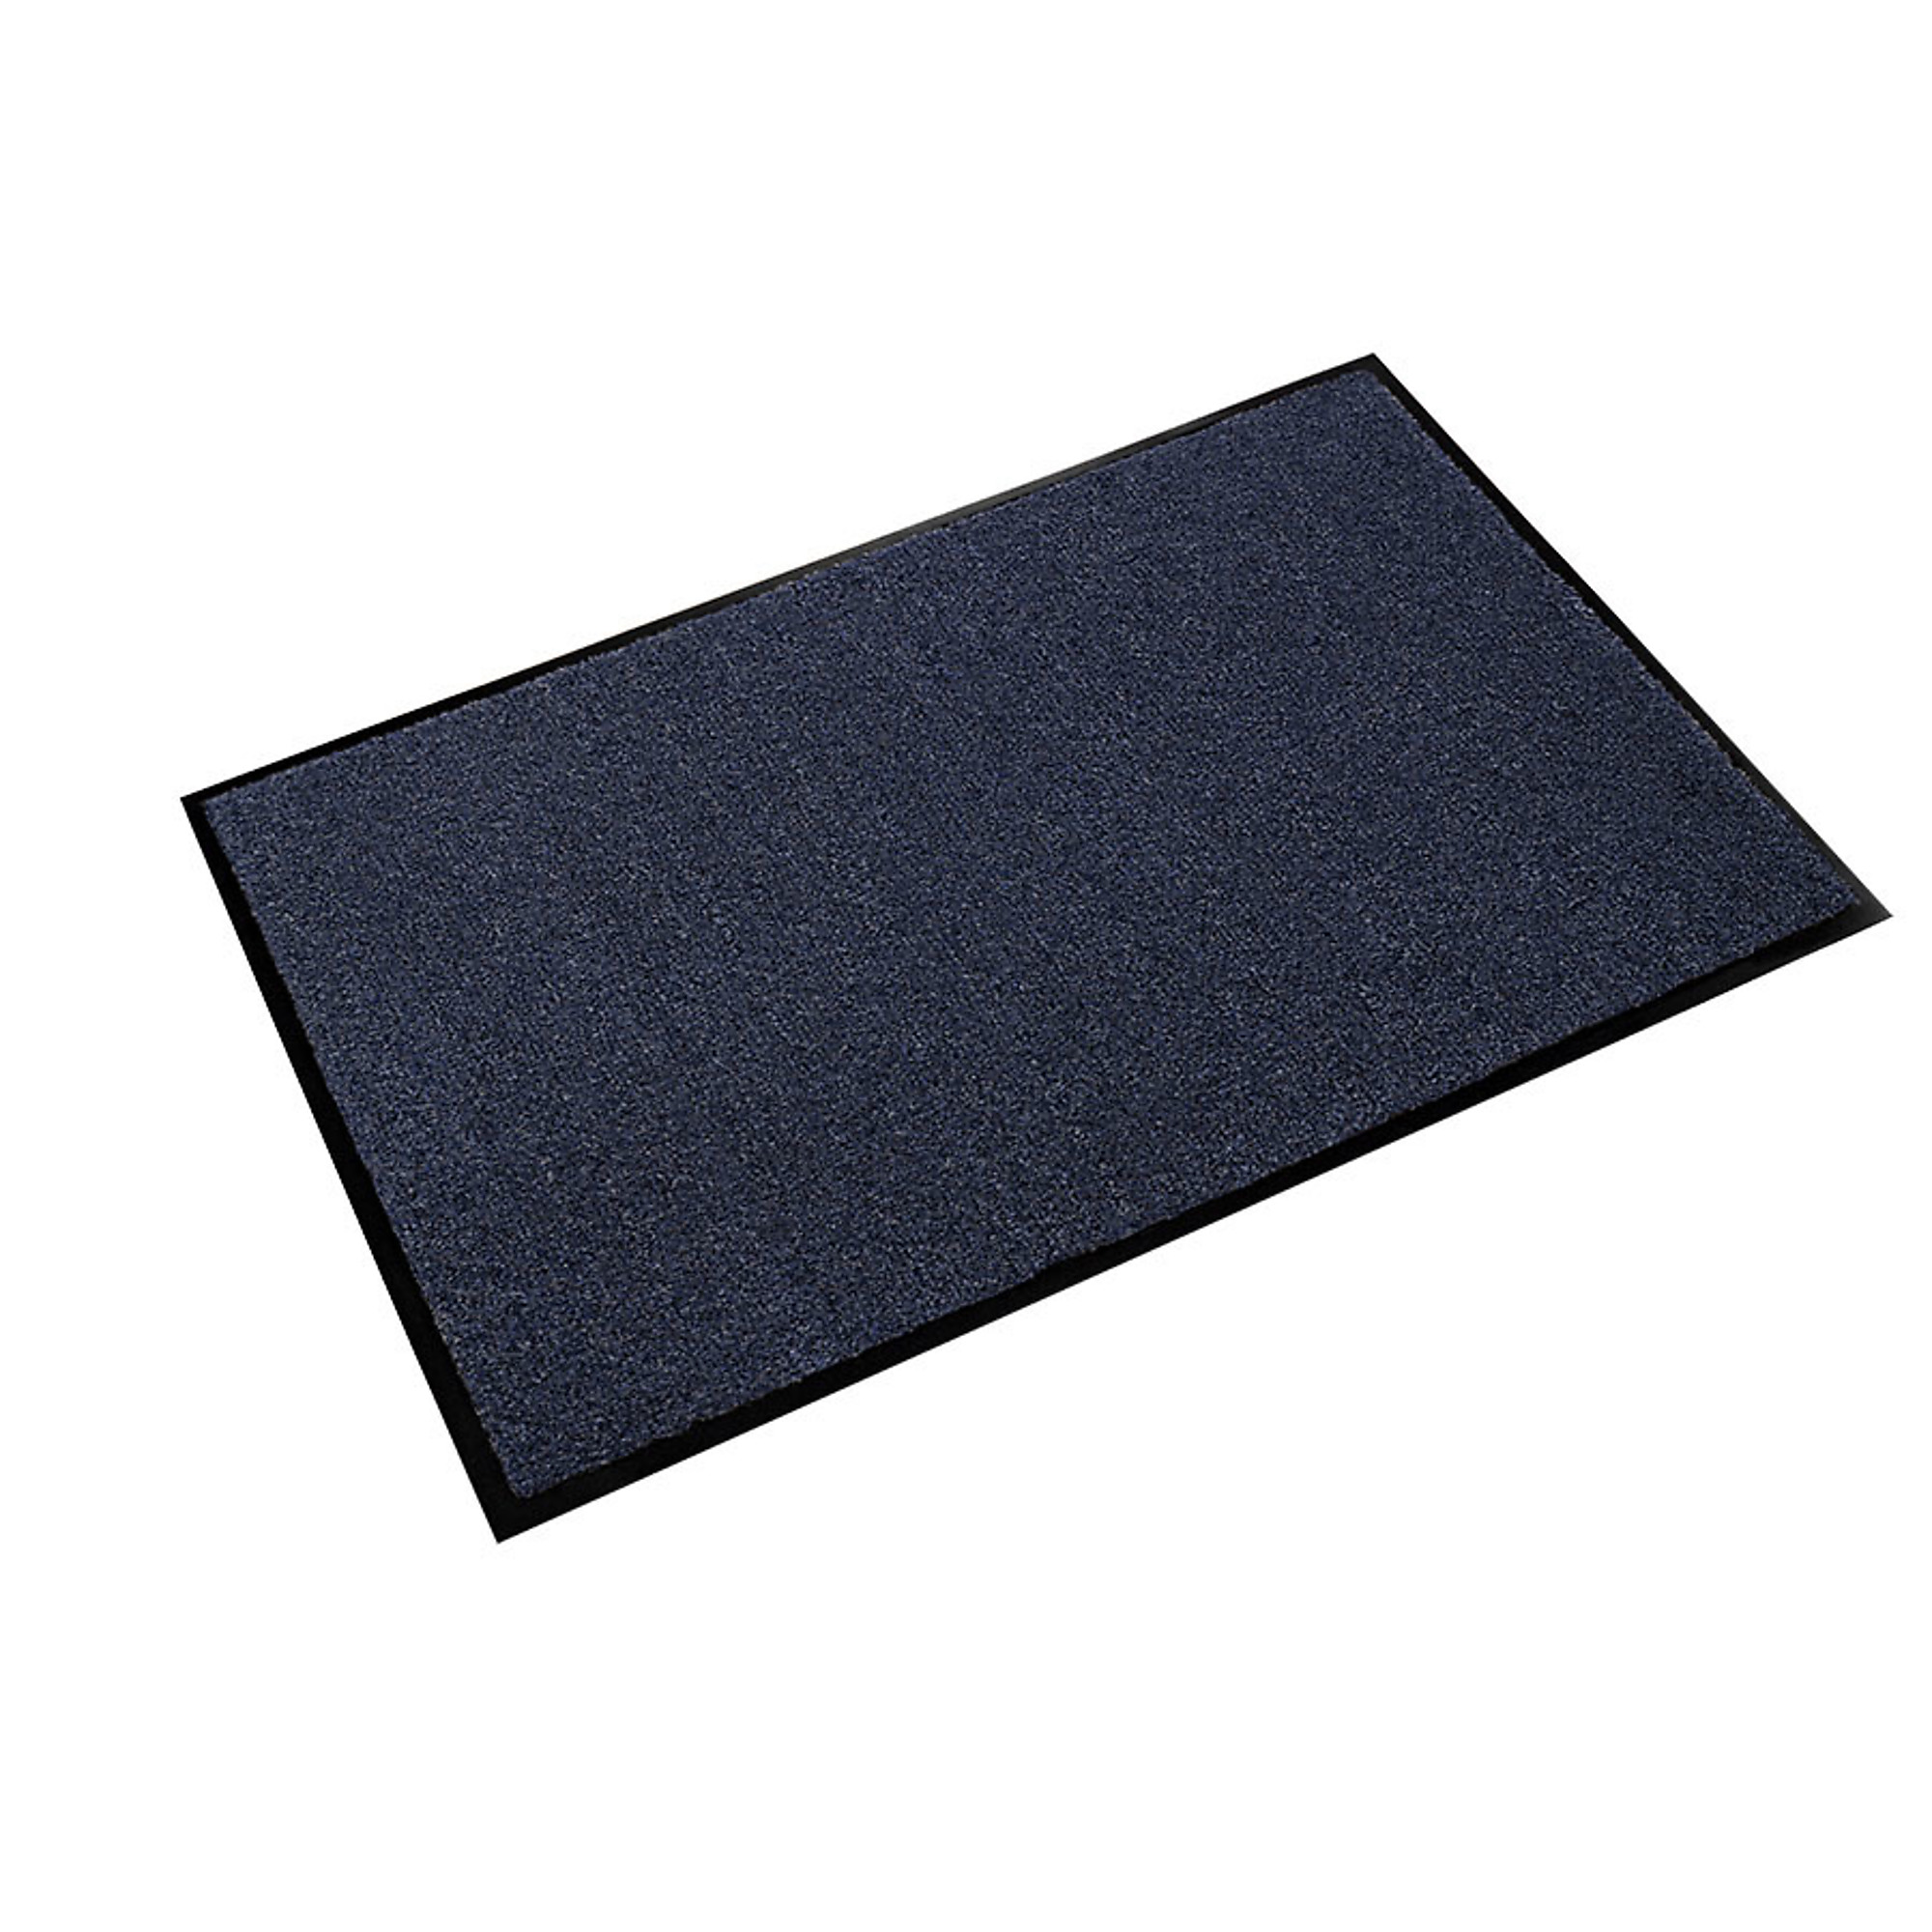 Crown Matting Technologies, Rely-On Olefin 3ft.x10ft. Navy Blue, Width 36 in, Length 120 in, Thickness 3/8 in, Model GS 0310NB